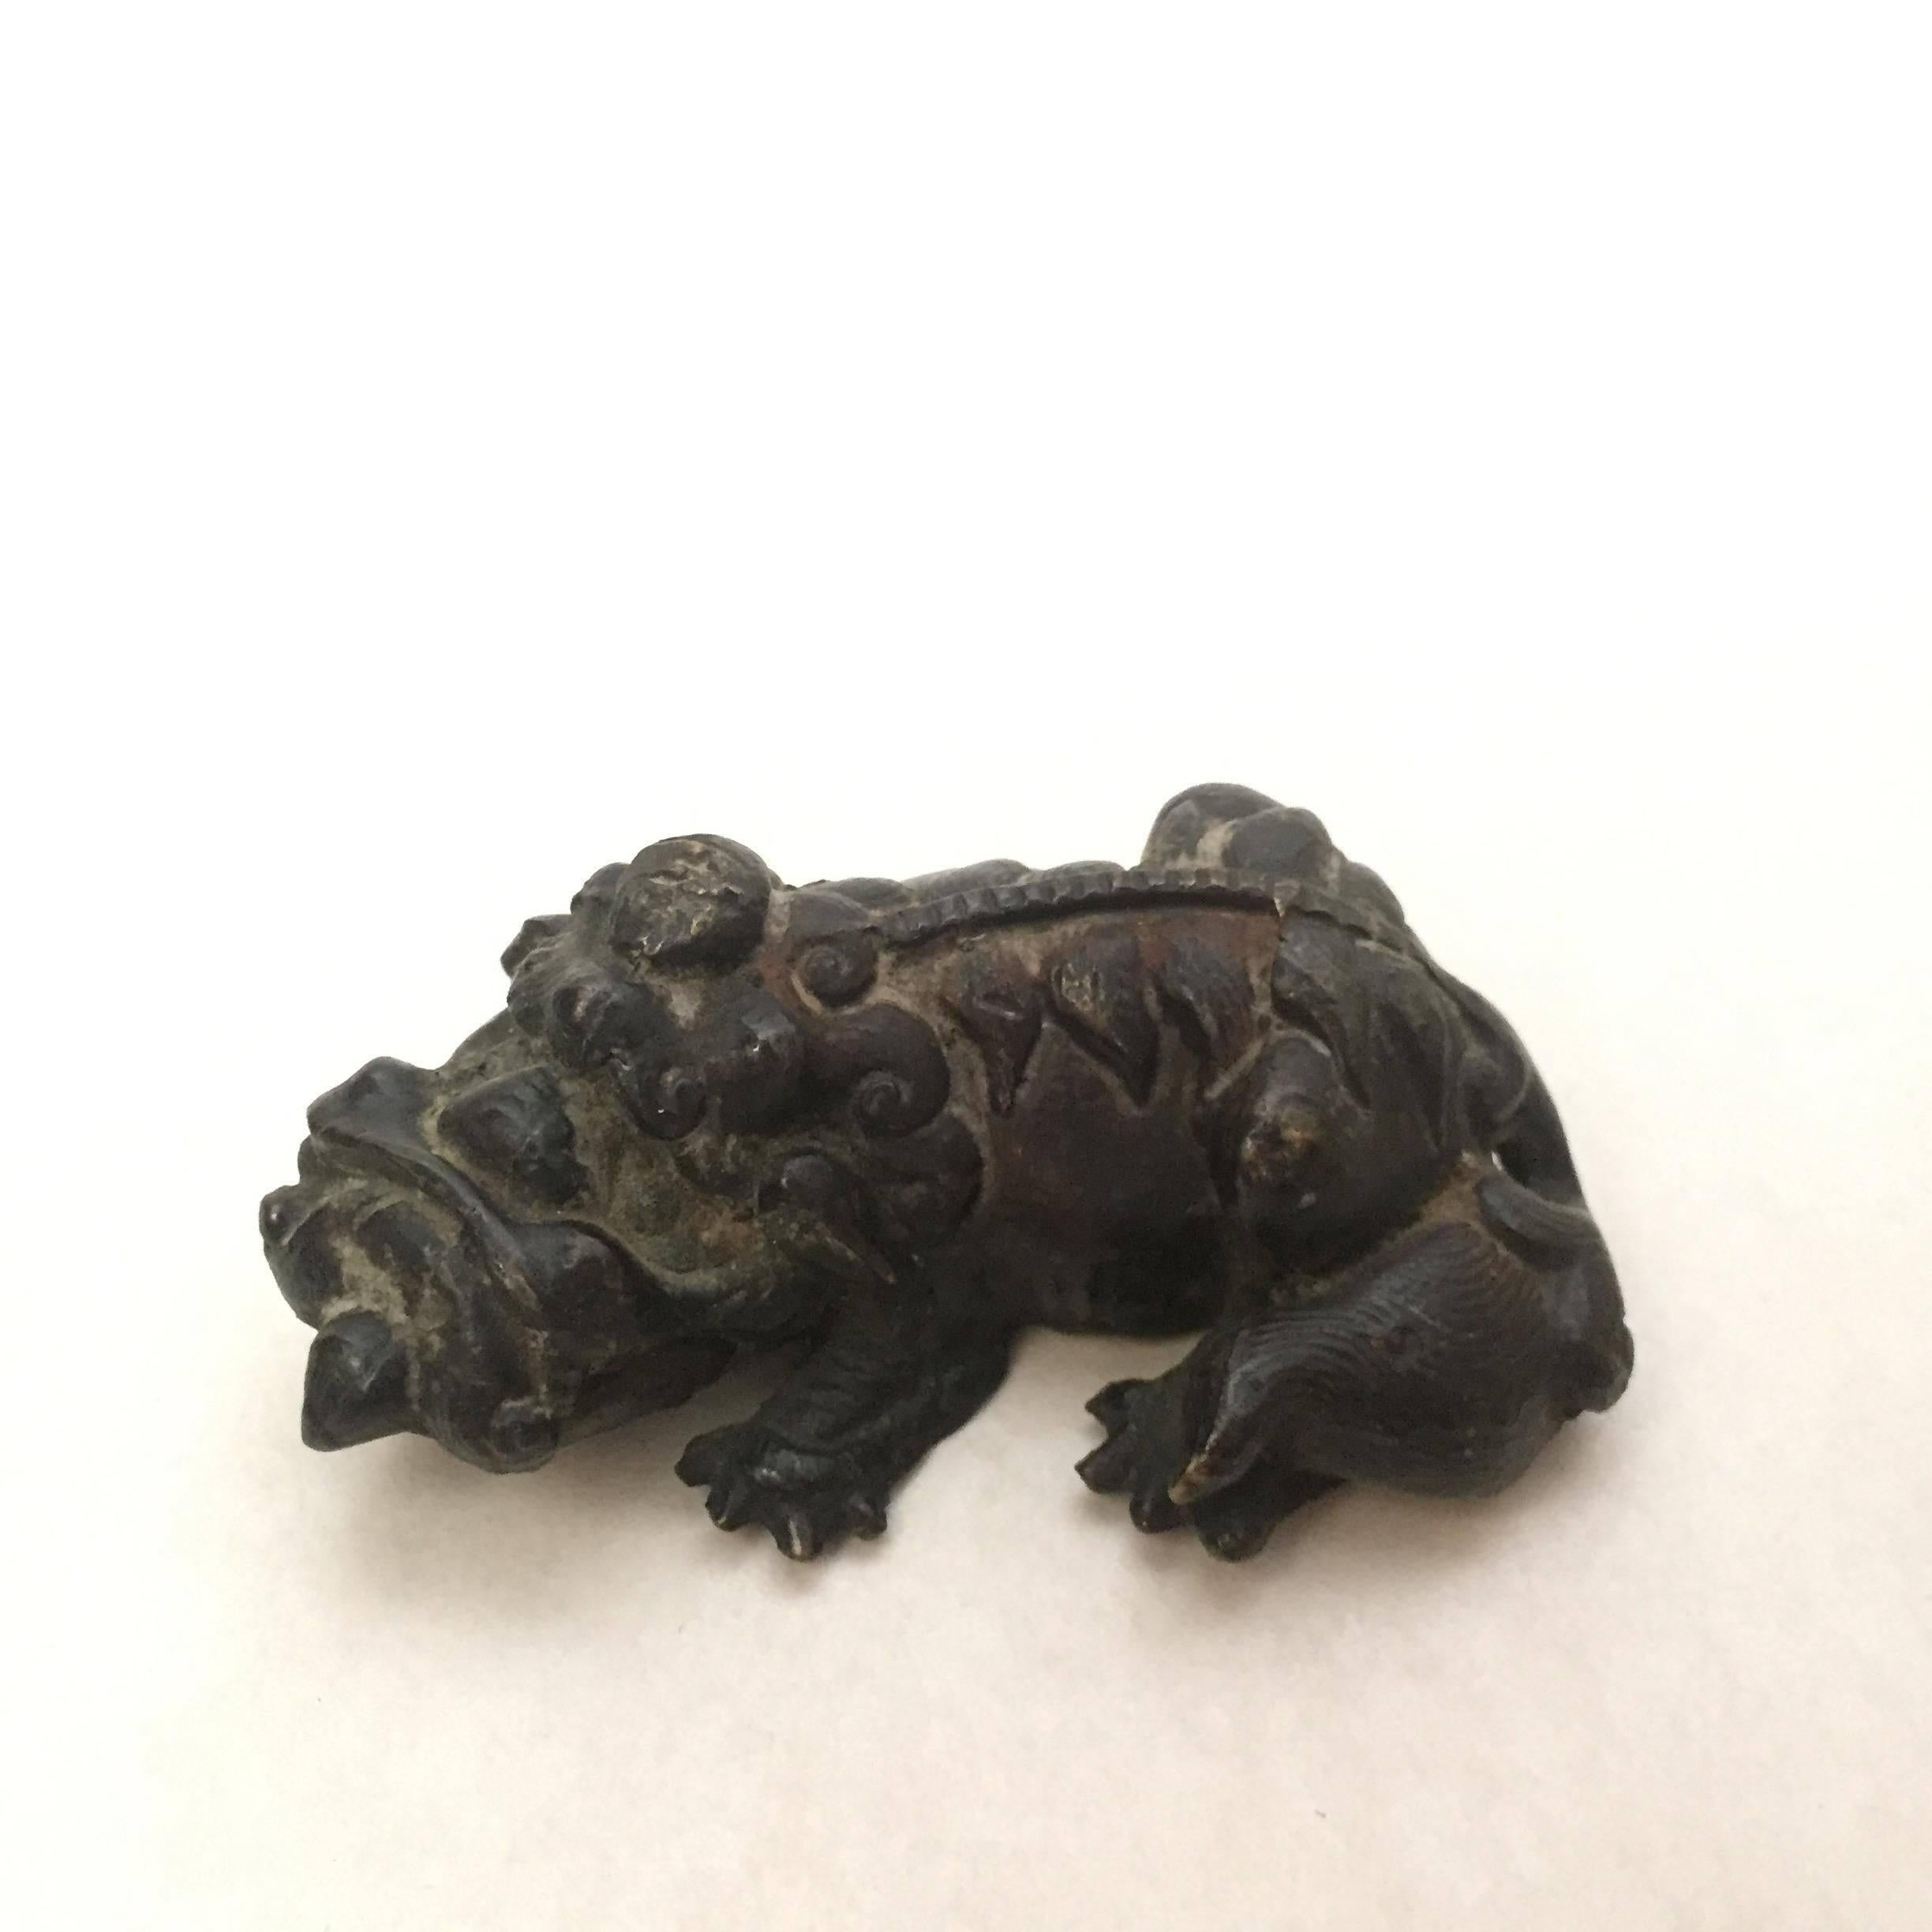 18th century Xuande mark Chinese bronze mythical beast paper weight.
A nice small bronze paperweight in the shape of a mythical beast. It has a Xuande mark to the base, but is of later age, most likely made during the 18th century. It measures